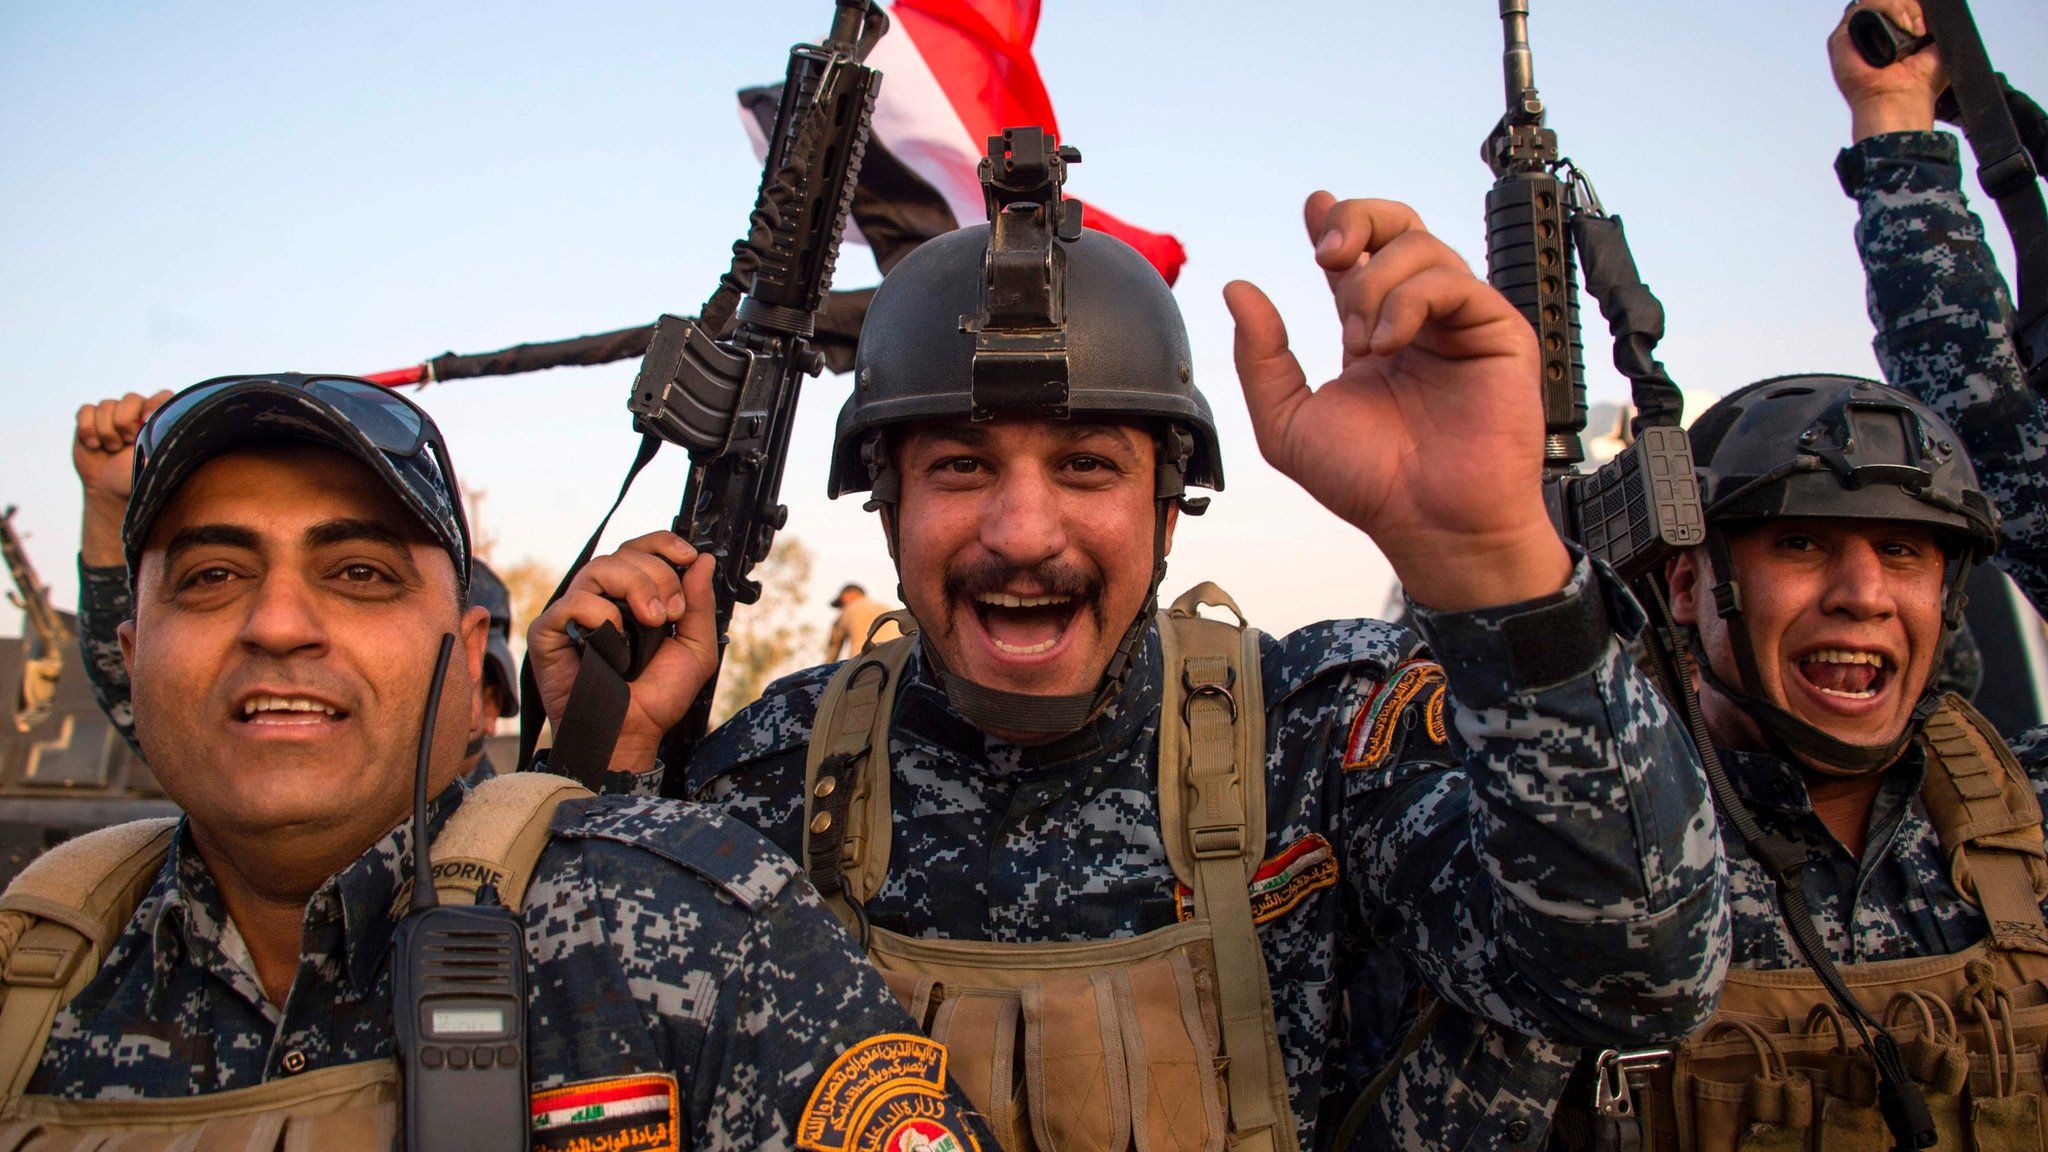 Members of the Iraqi federal police celebrate in the Old City of Mosul on 10 July 2017